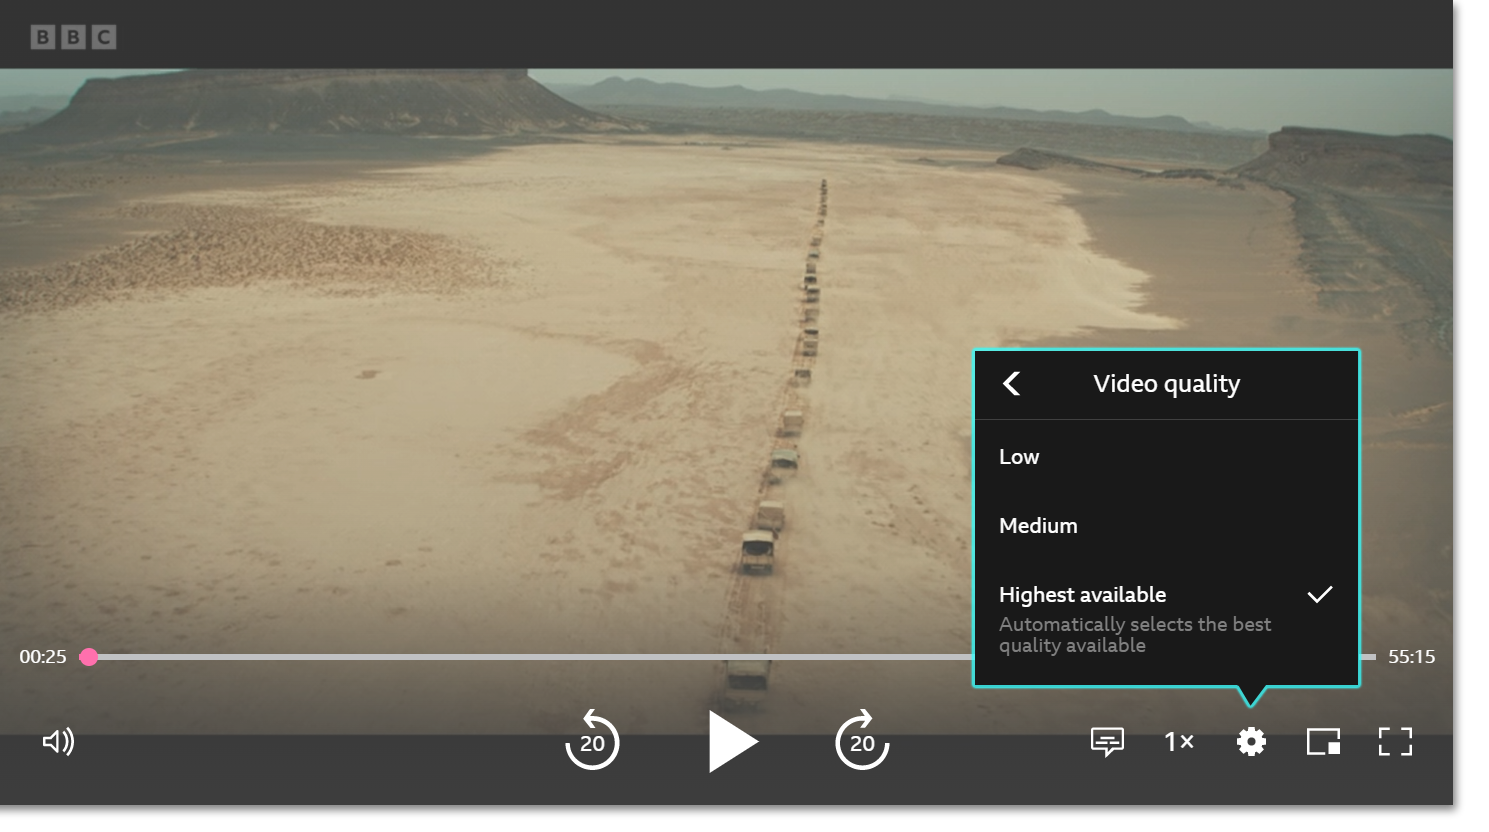 Click on the settings icon within the BBC iPlayer player.
Choose a lower video quality option to reduce buffering and improve playback.